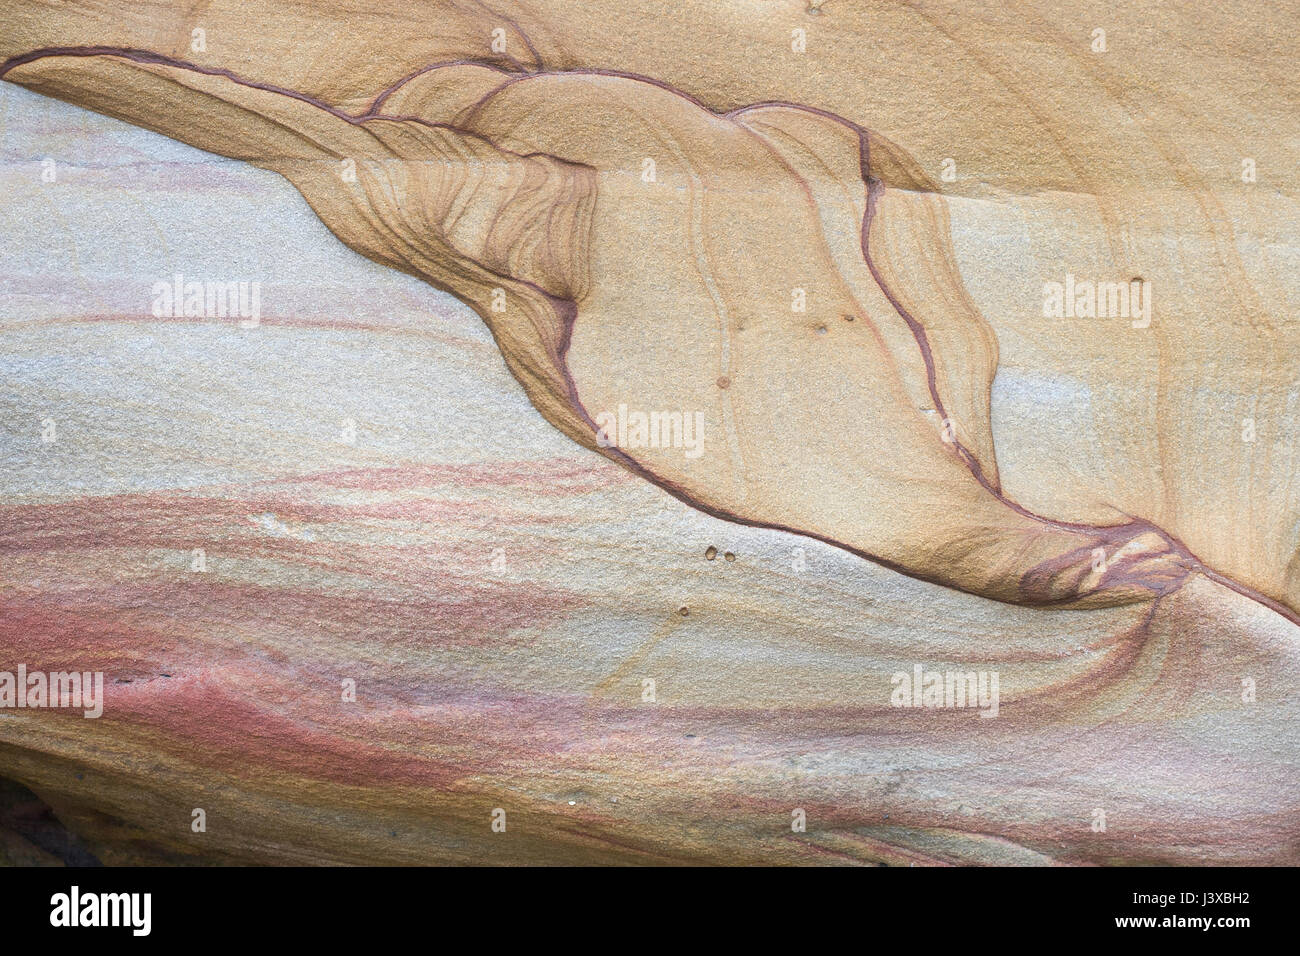 An abstract shape in a sandstone cliff. Stock Photo